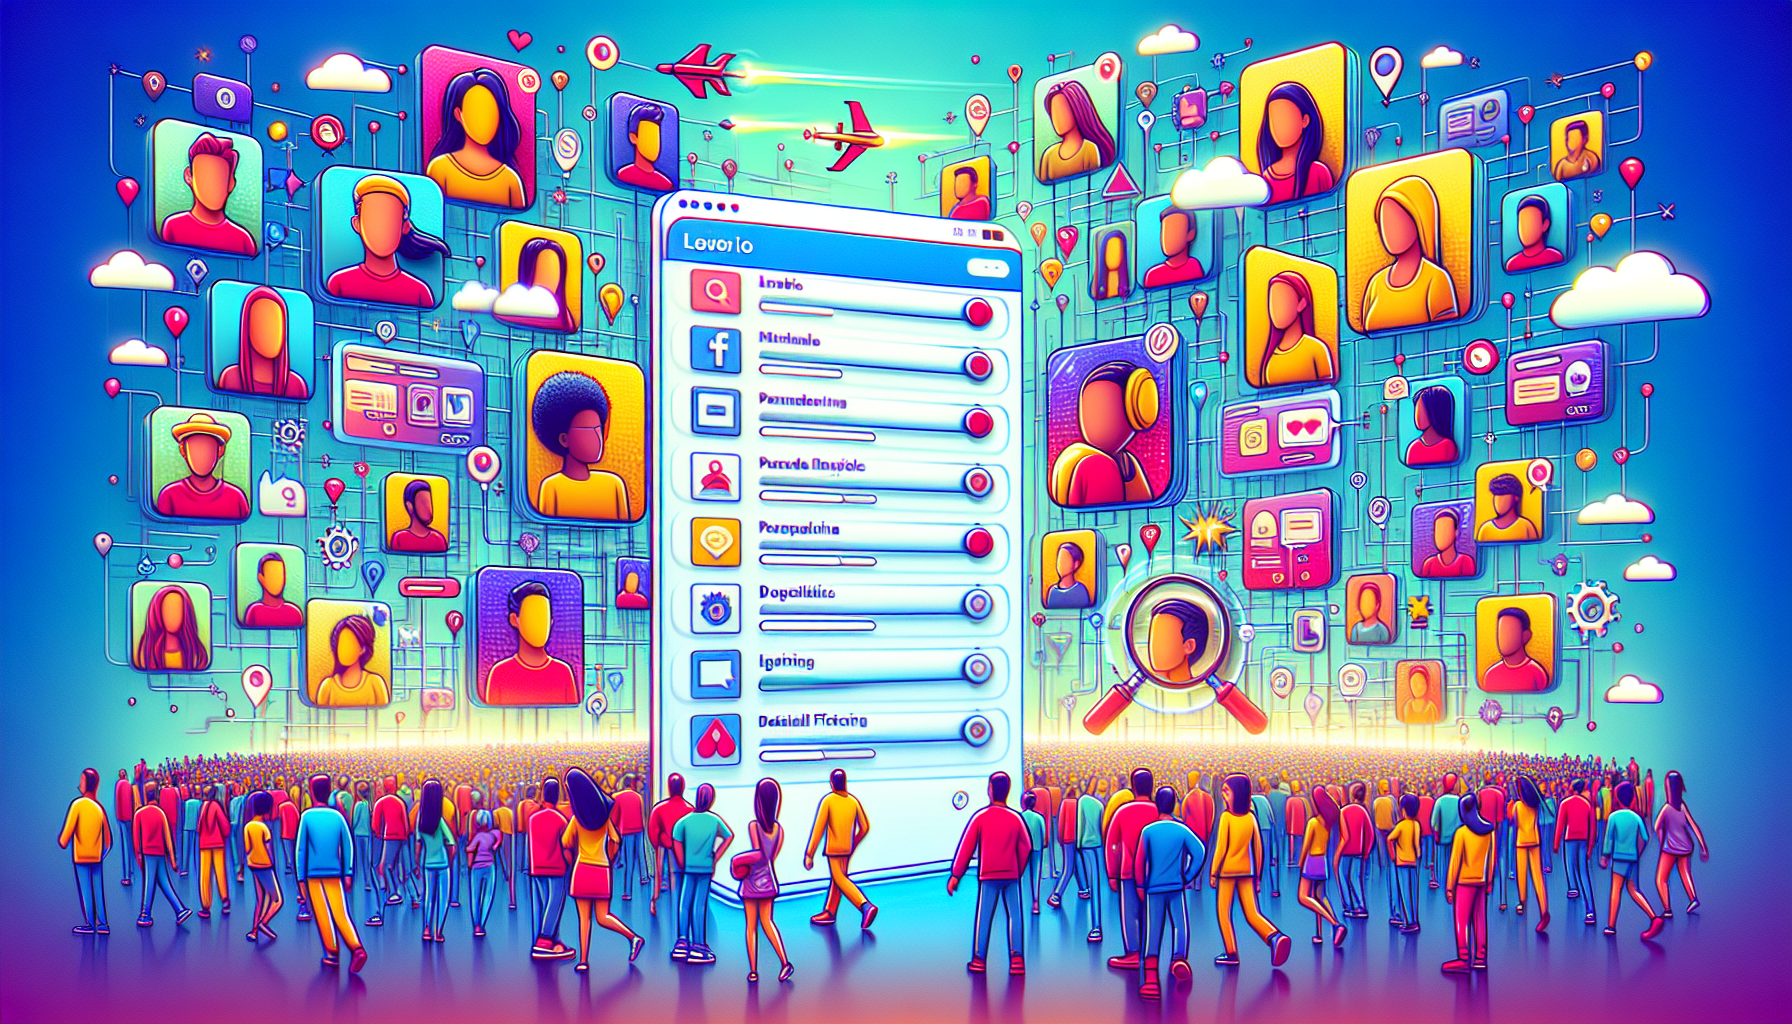 Illustration of a marketplace with influencer profiles and filtering options